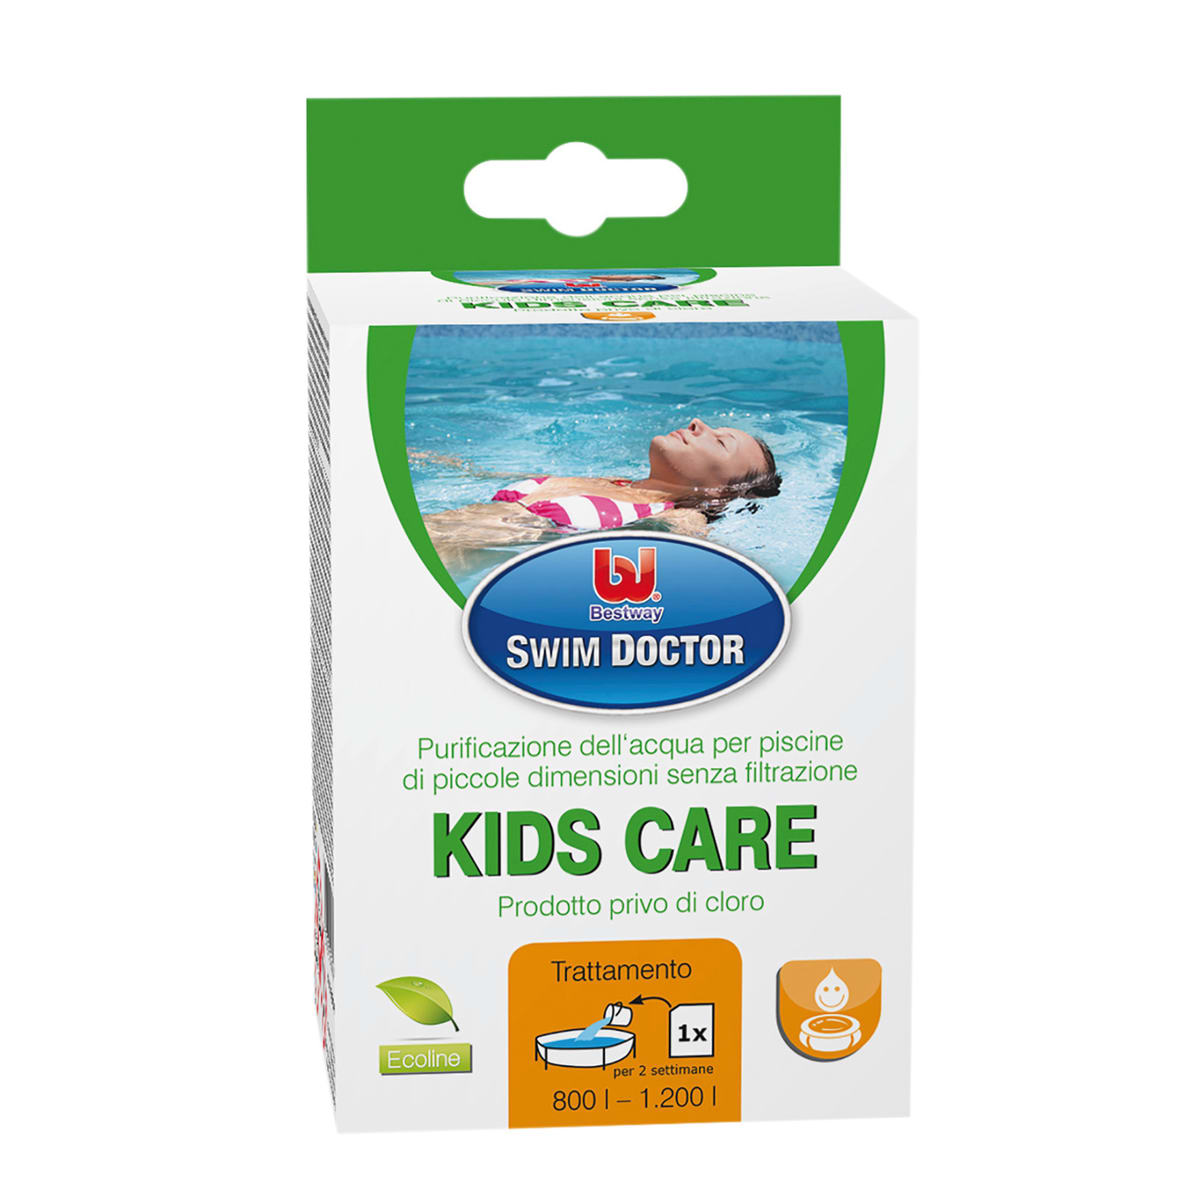 KIDS CARE PURIFIER SACHETS FOR SWIMMING POOLS 5X50ML